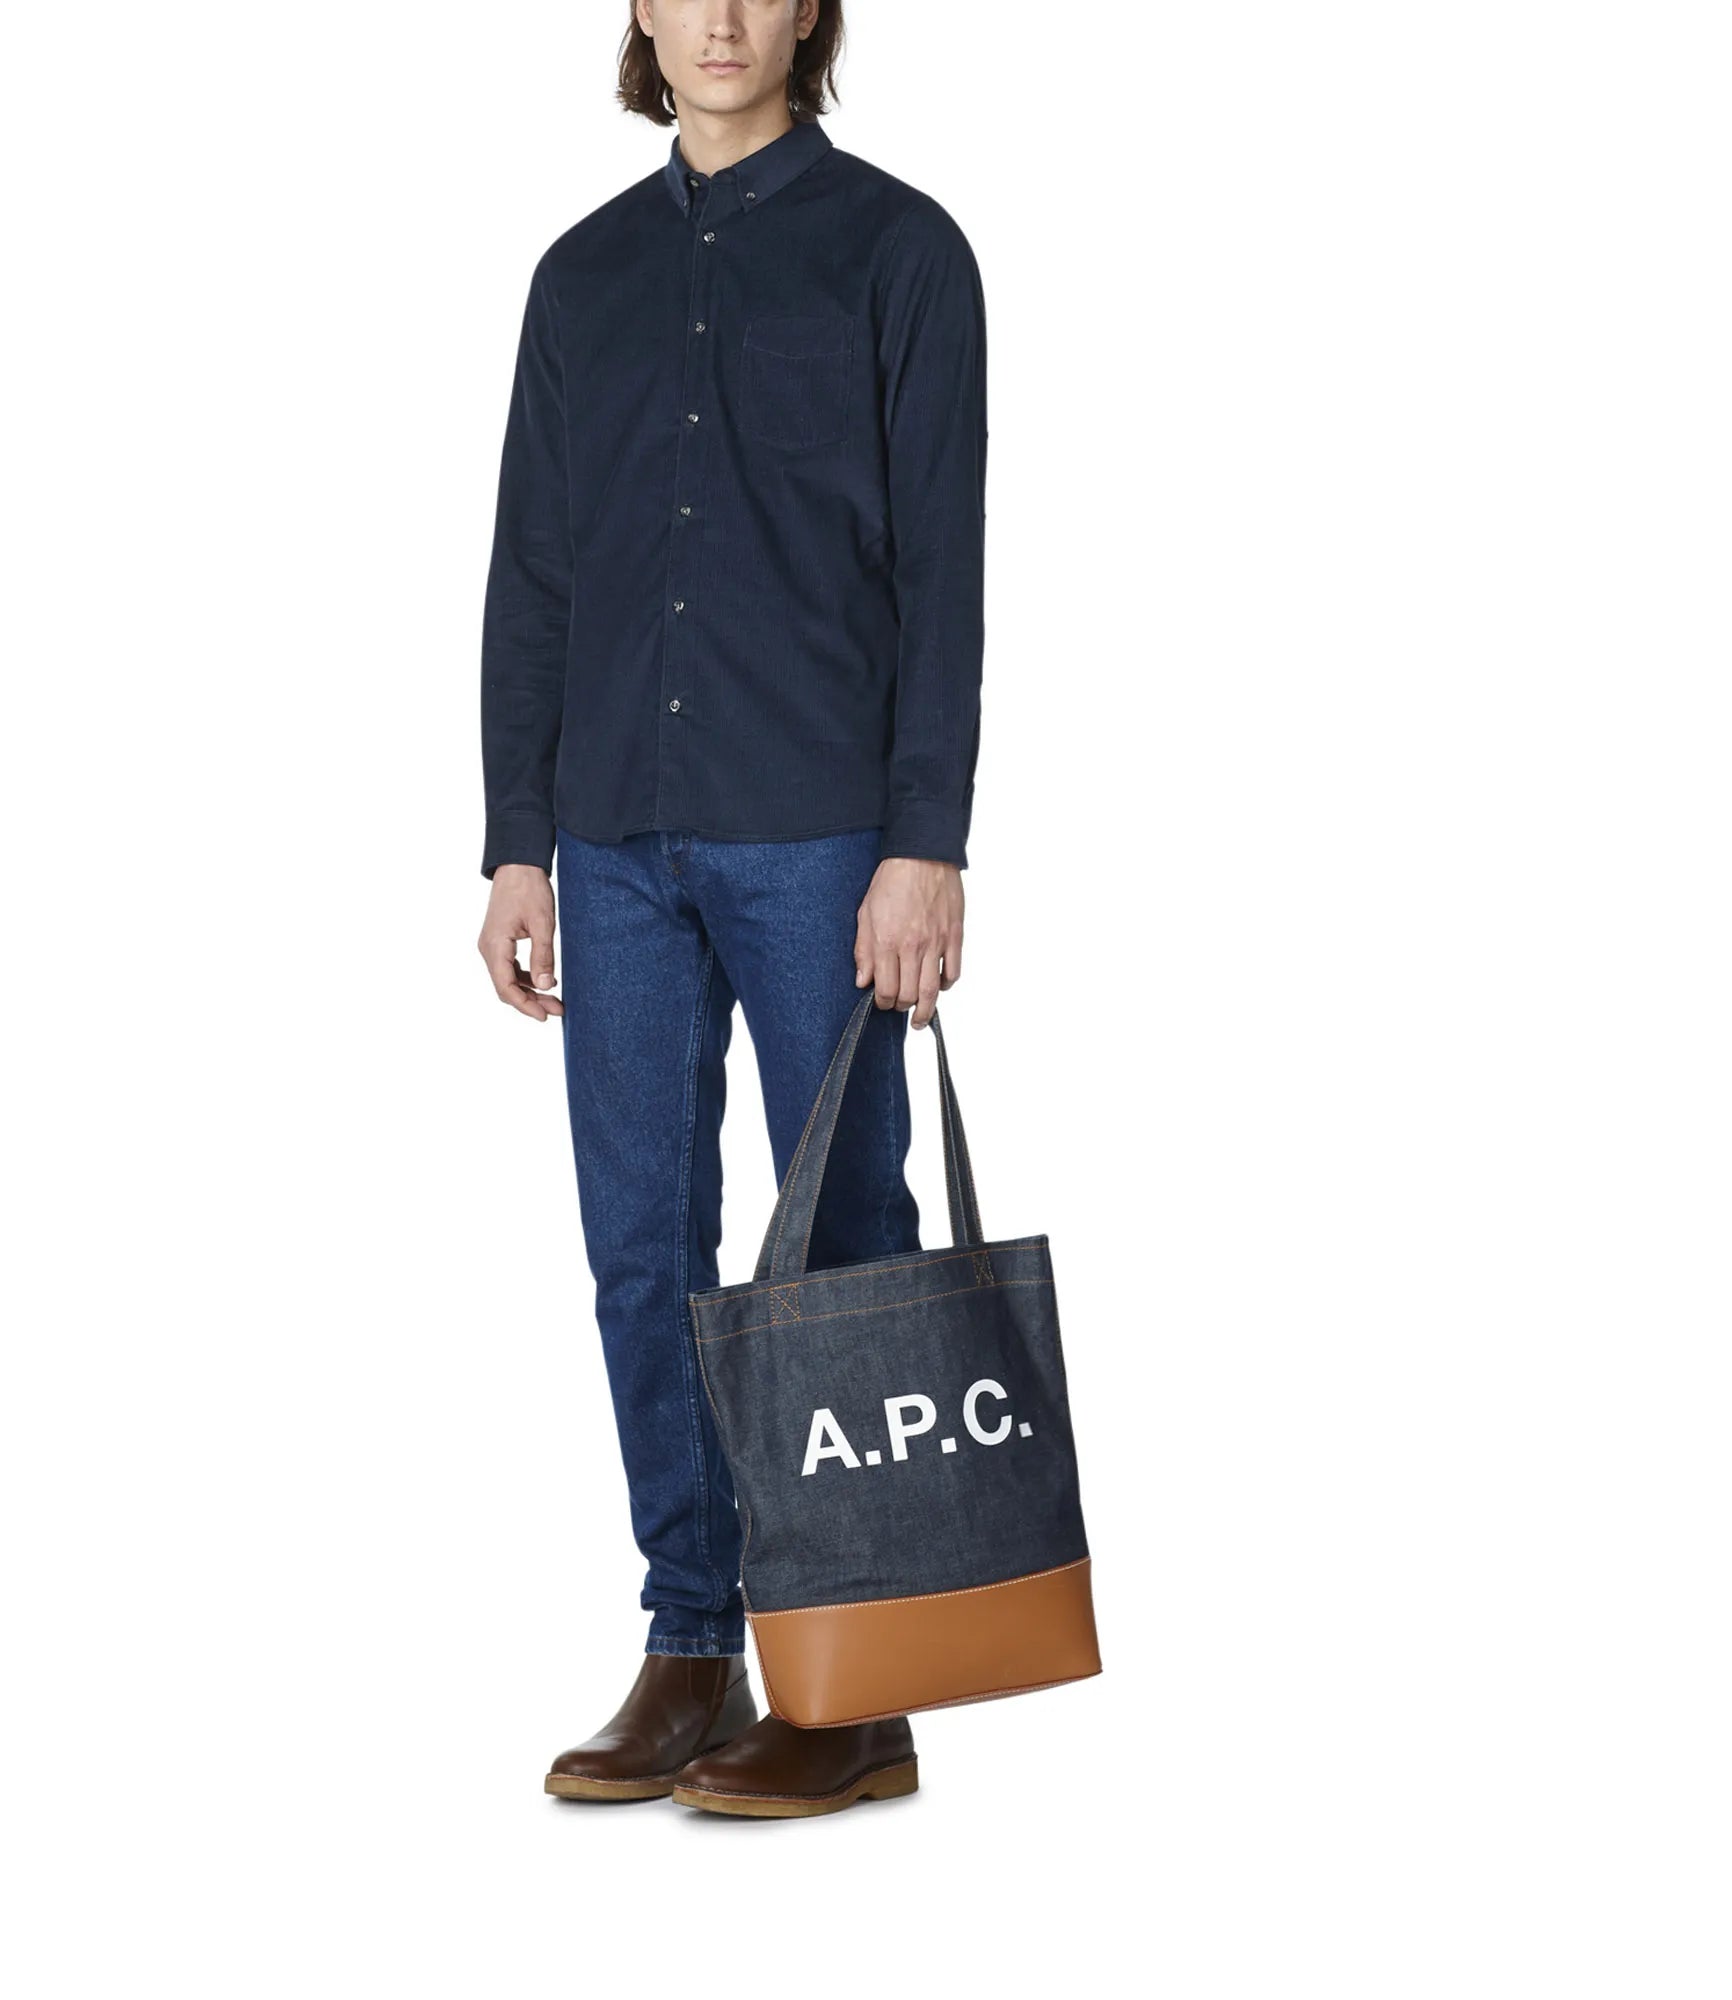 Axelle tote bag | Japanese Denim and smooth leather | A.P.C. Accessories